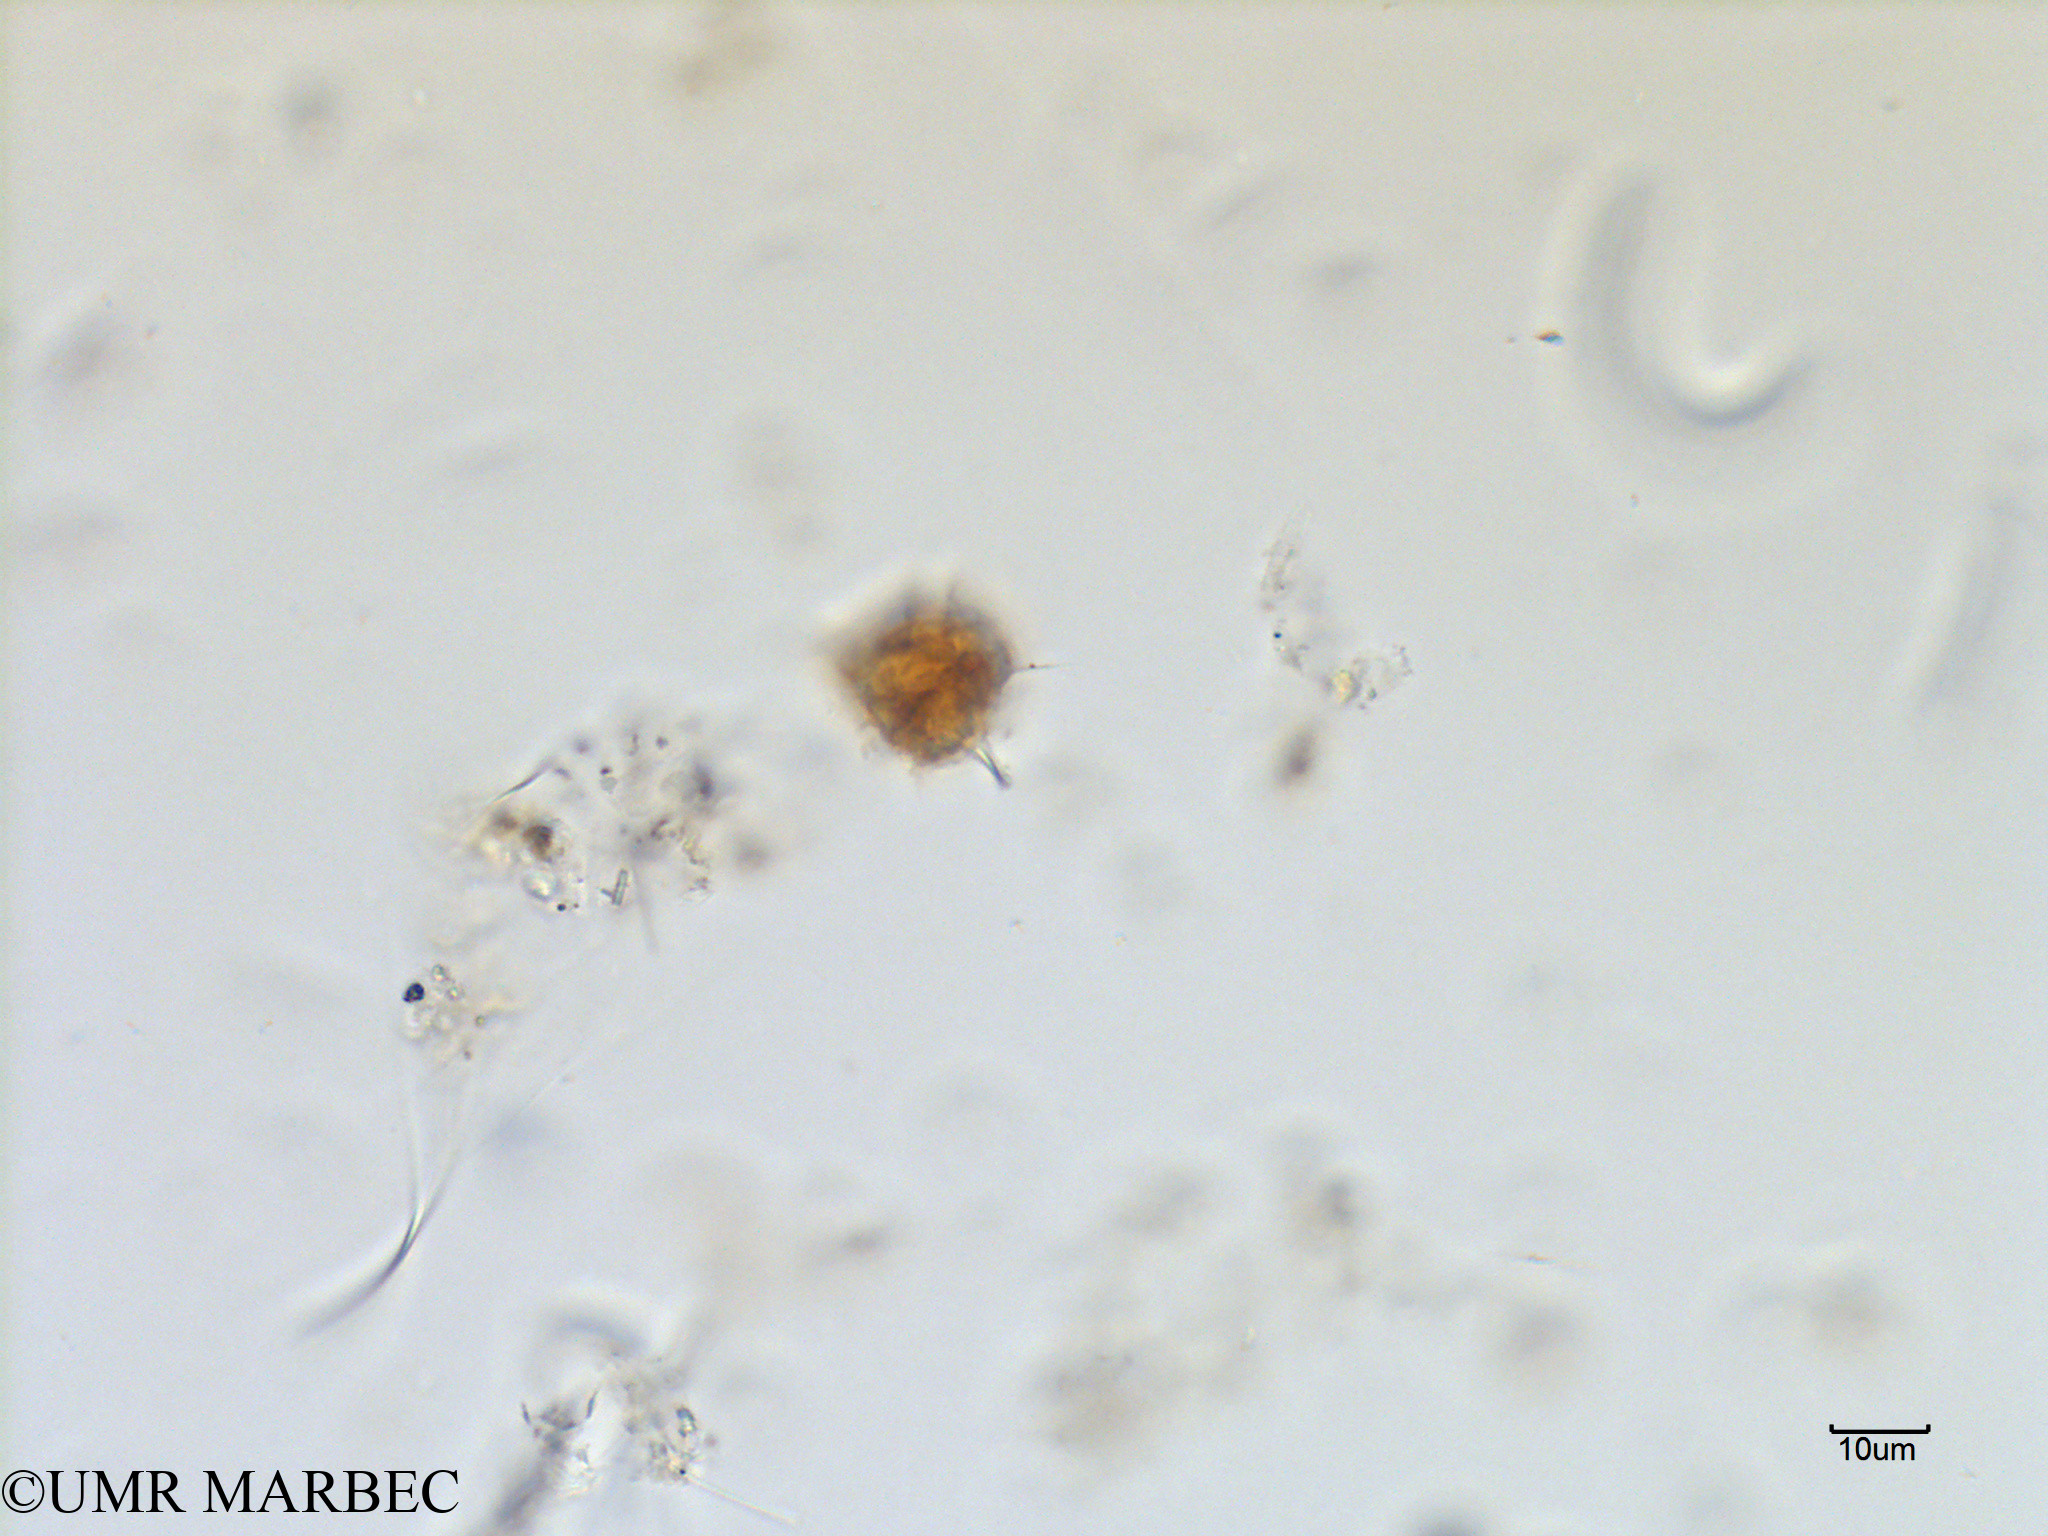 phyto/Scattered_Islands/mayotte_lagoon/SIREME May 2016/Protoperidinium bipes (old P. sp53 -MAY7_Protoperidinium2 bdd-3).tif(copy).jpg